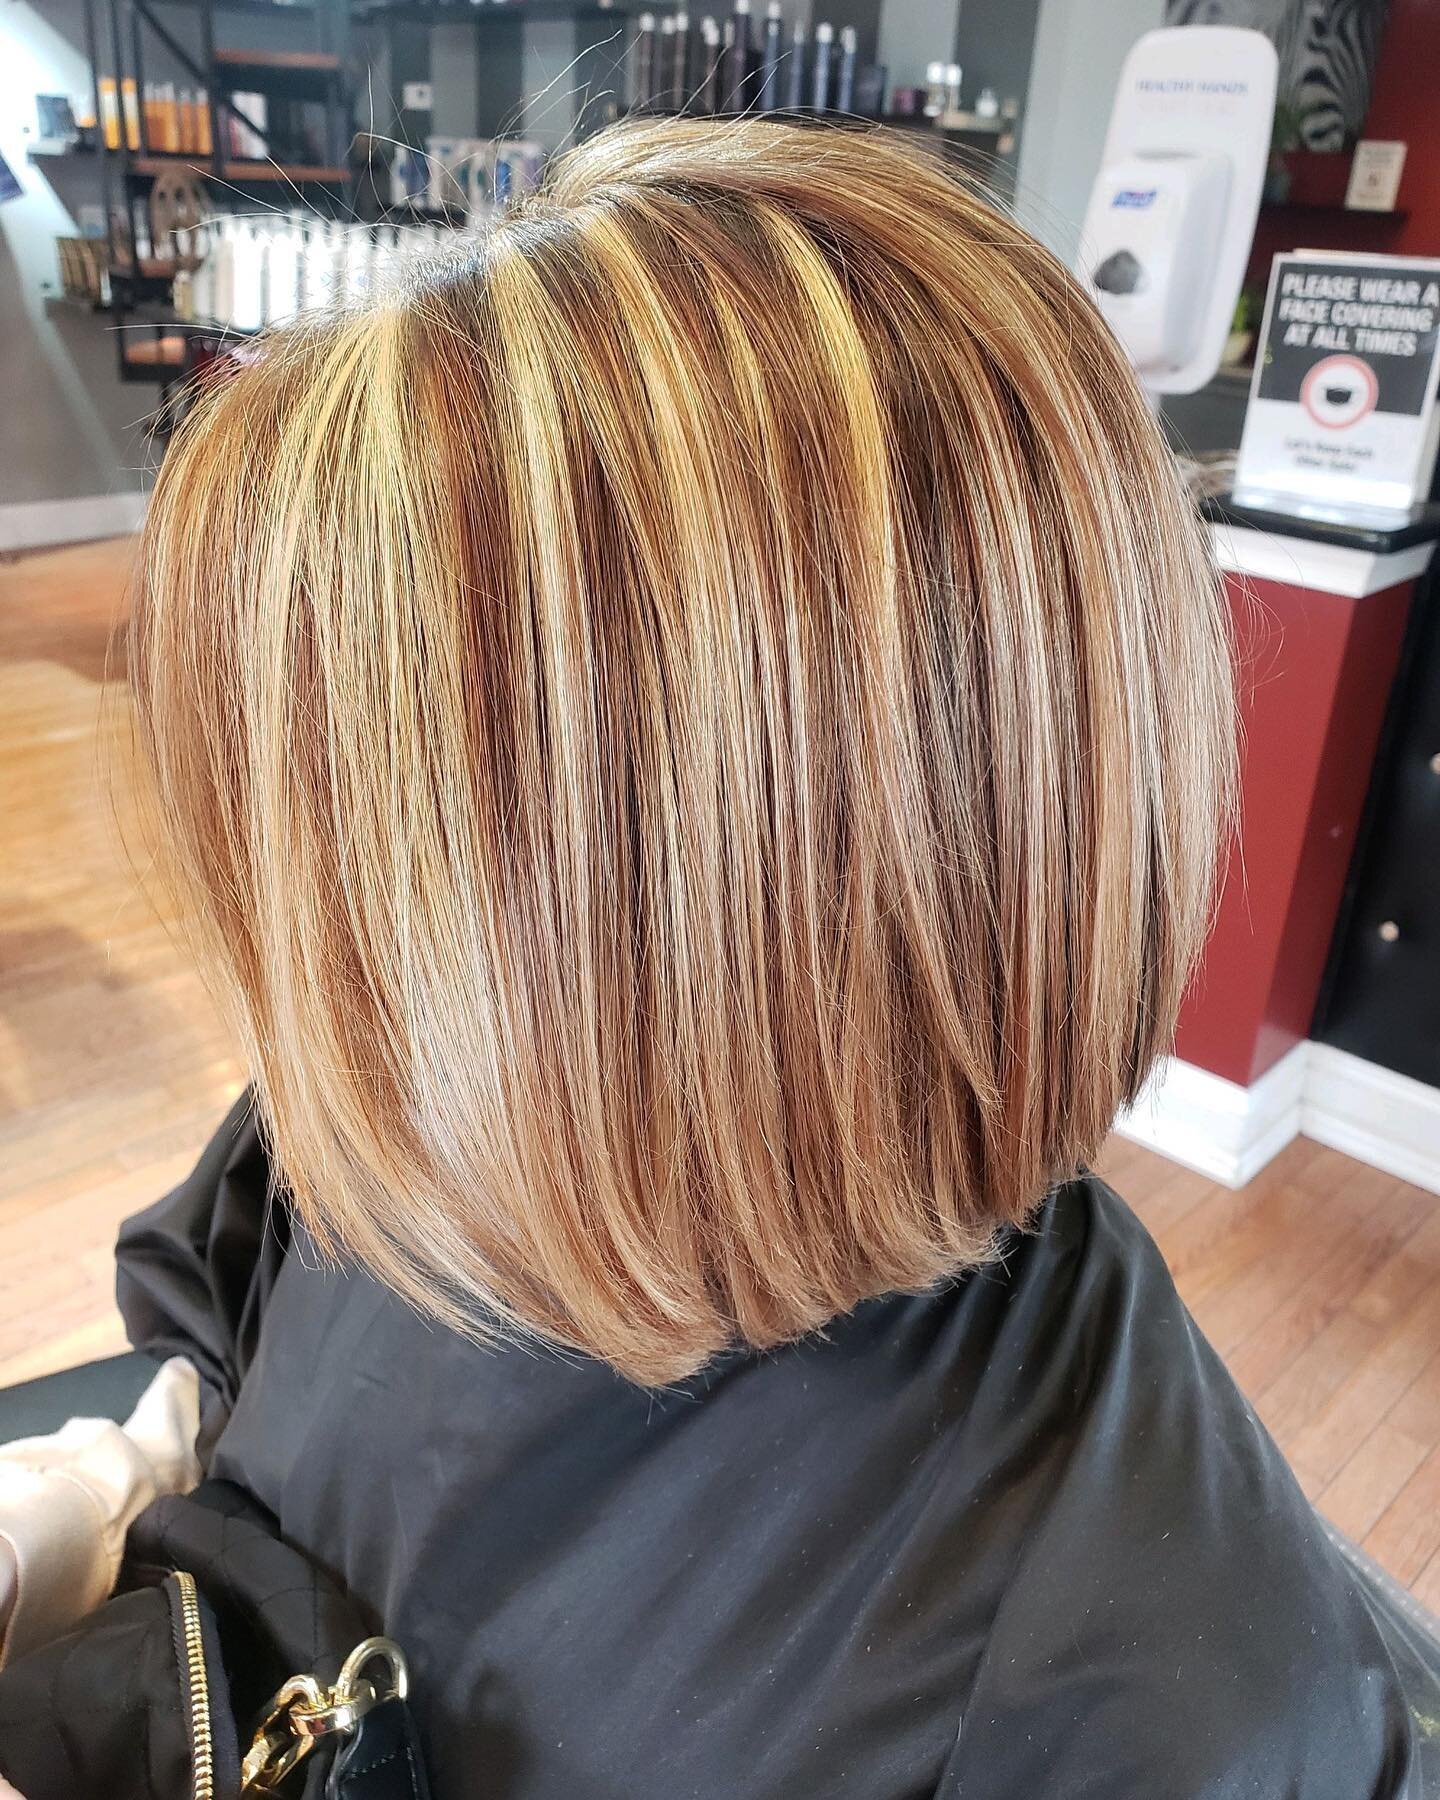 Does anyone else THINK they want long hair but then see a short cut and think, &quot;chop✂️chop✂️&quot; -  because SAME
.
Hairstylist: Amanda D 💇🏻&zwj;♀️
.
.
.
.
#lexsalon #phoenixvillehair #phoenixville #phoenixvillepa #phoenixvillehairstylist #pv